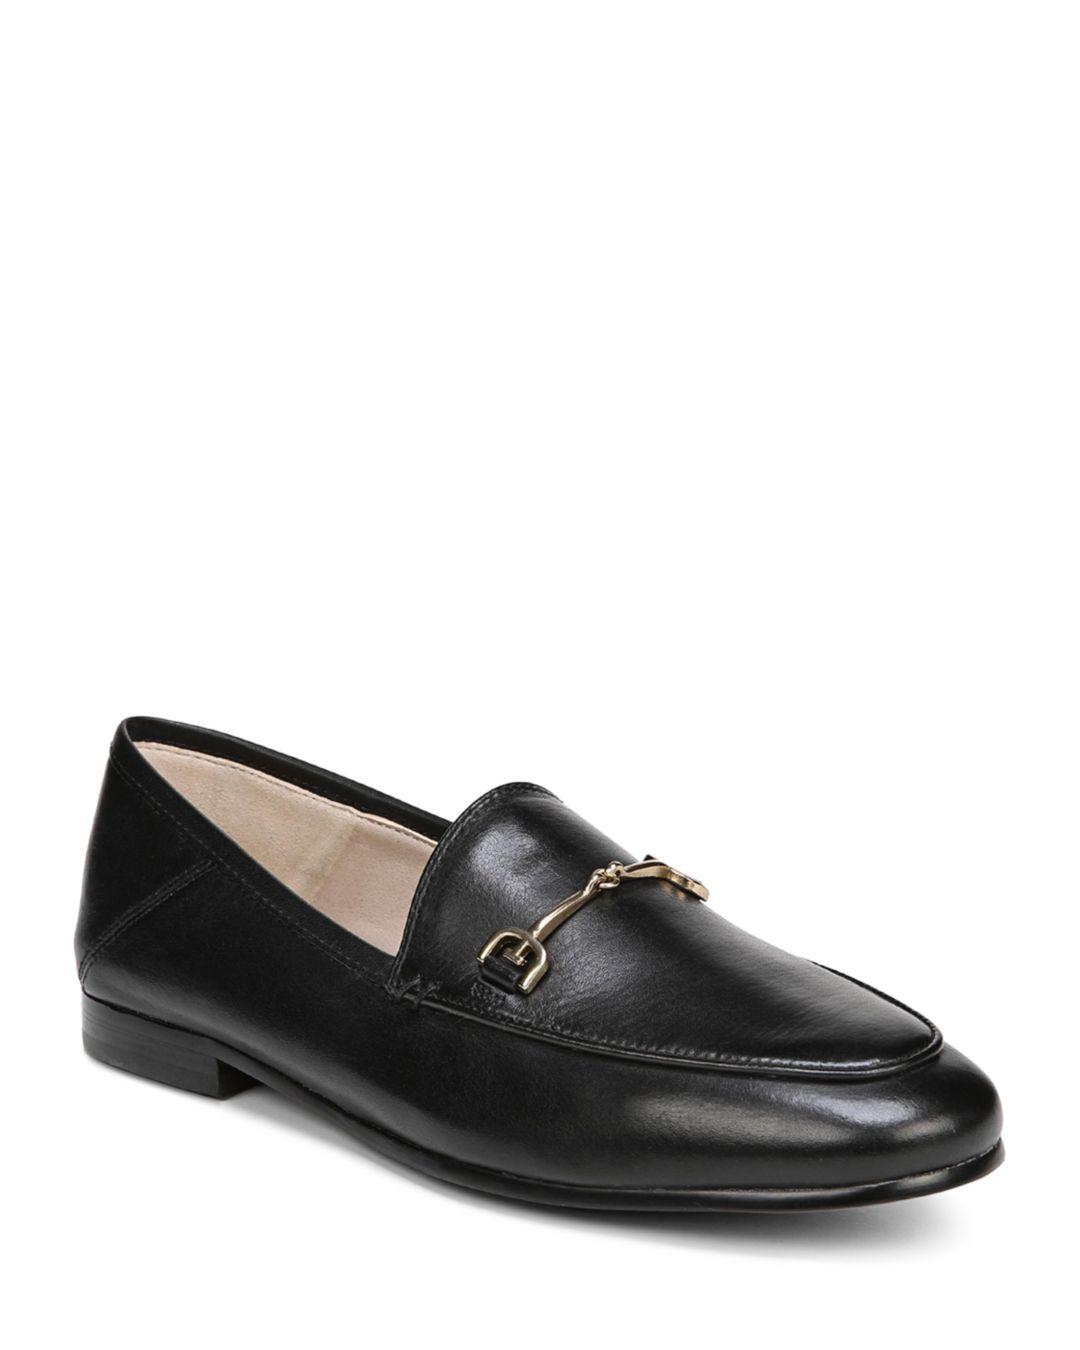 Sam Edelman Leather Loraine Loafers in Black Leather (Black) - Lyst